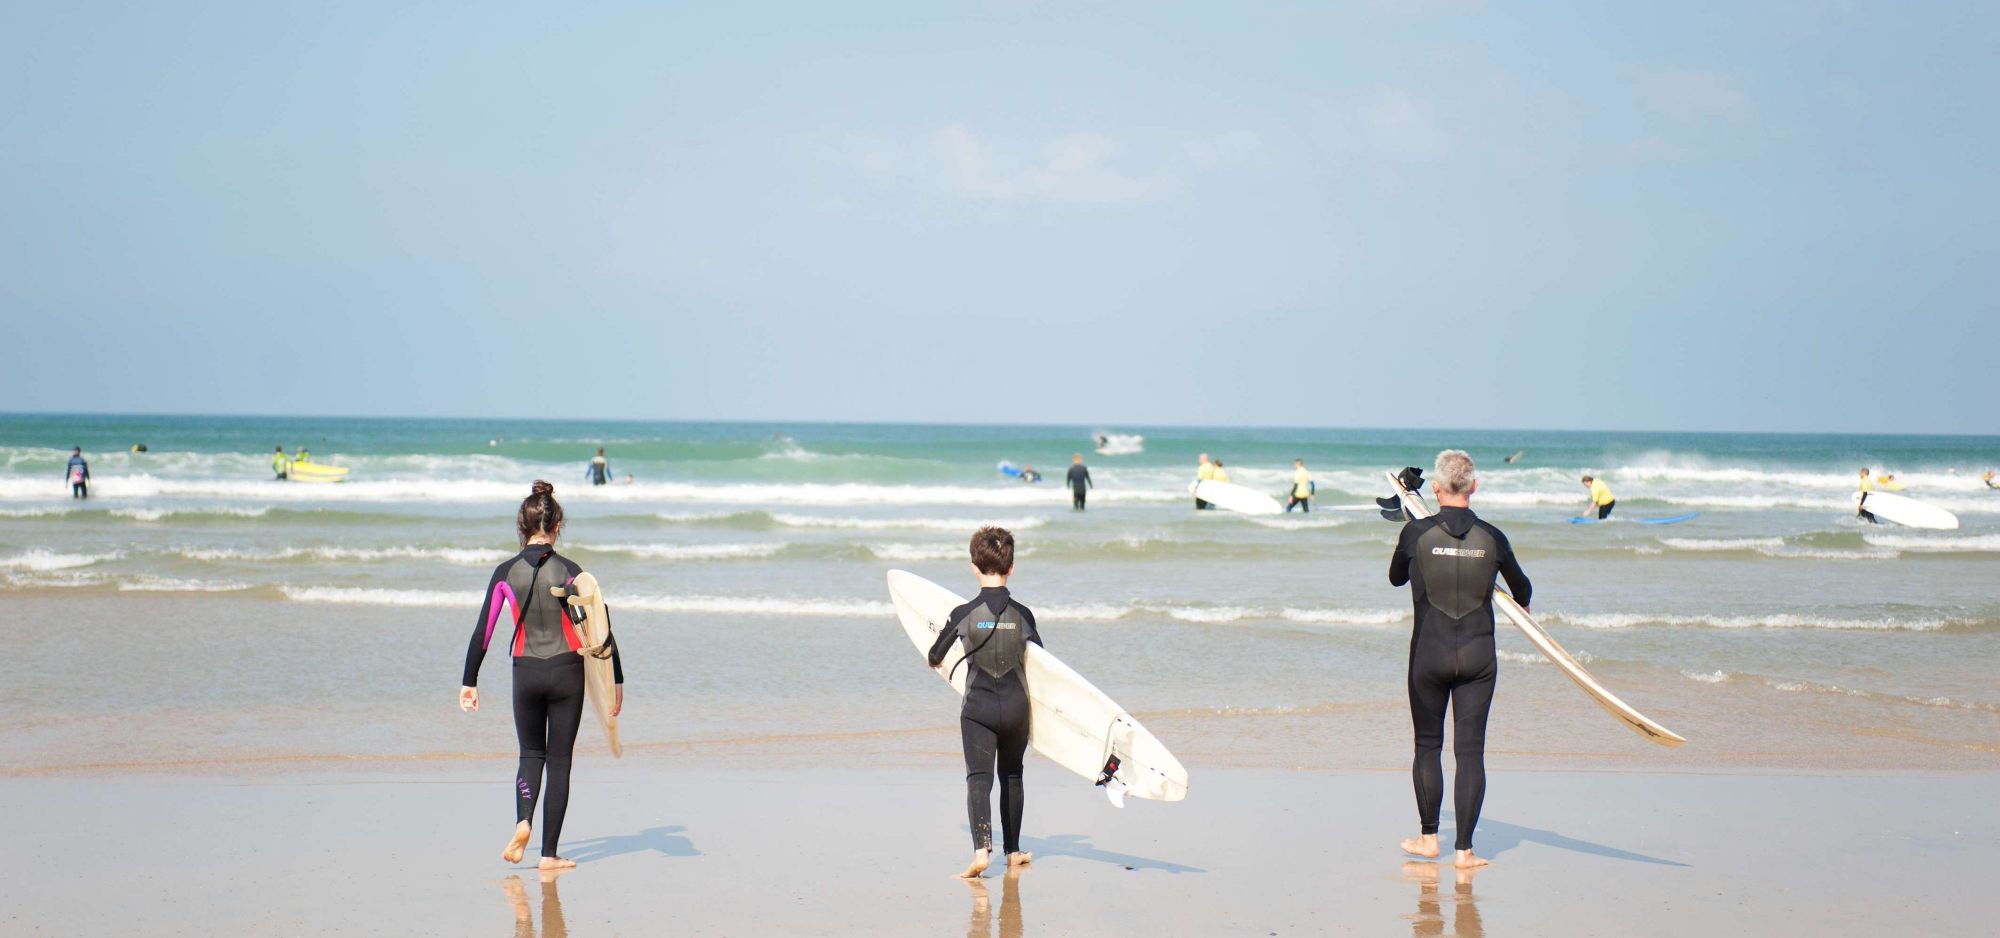 Surfers at the beach in Cornwall